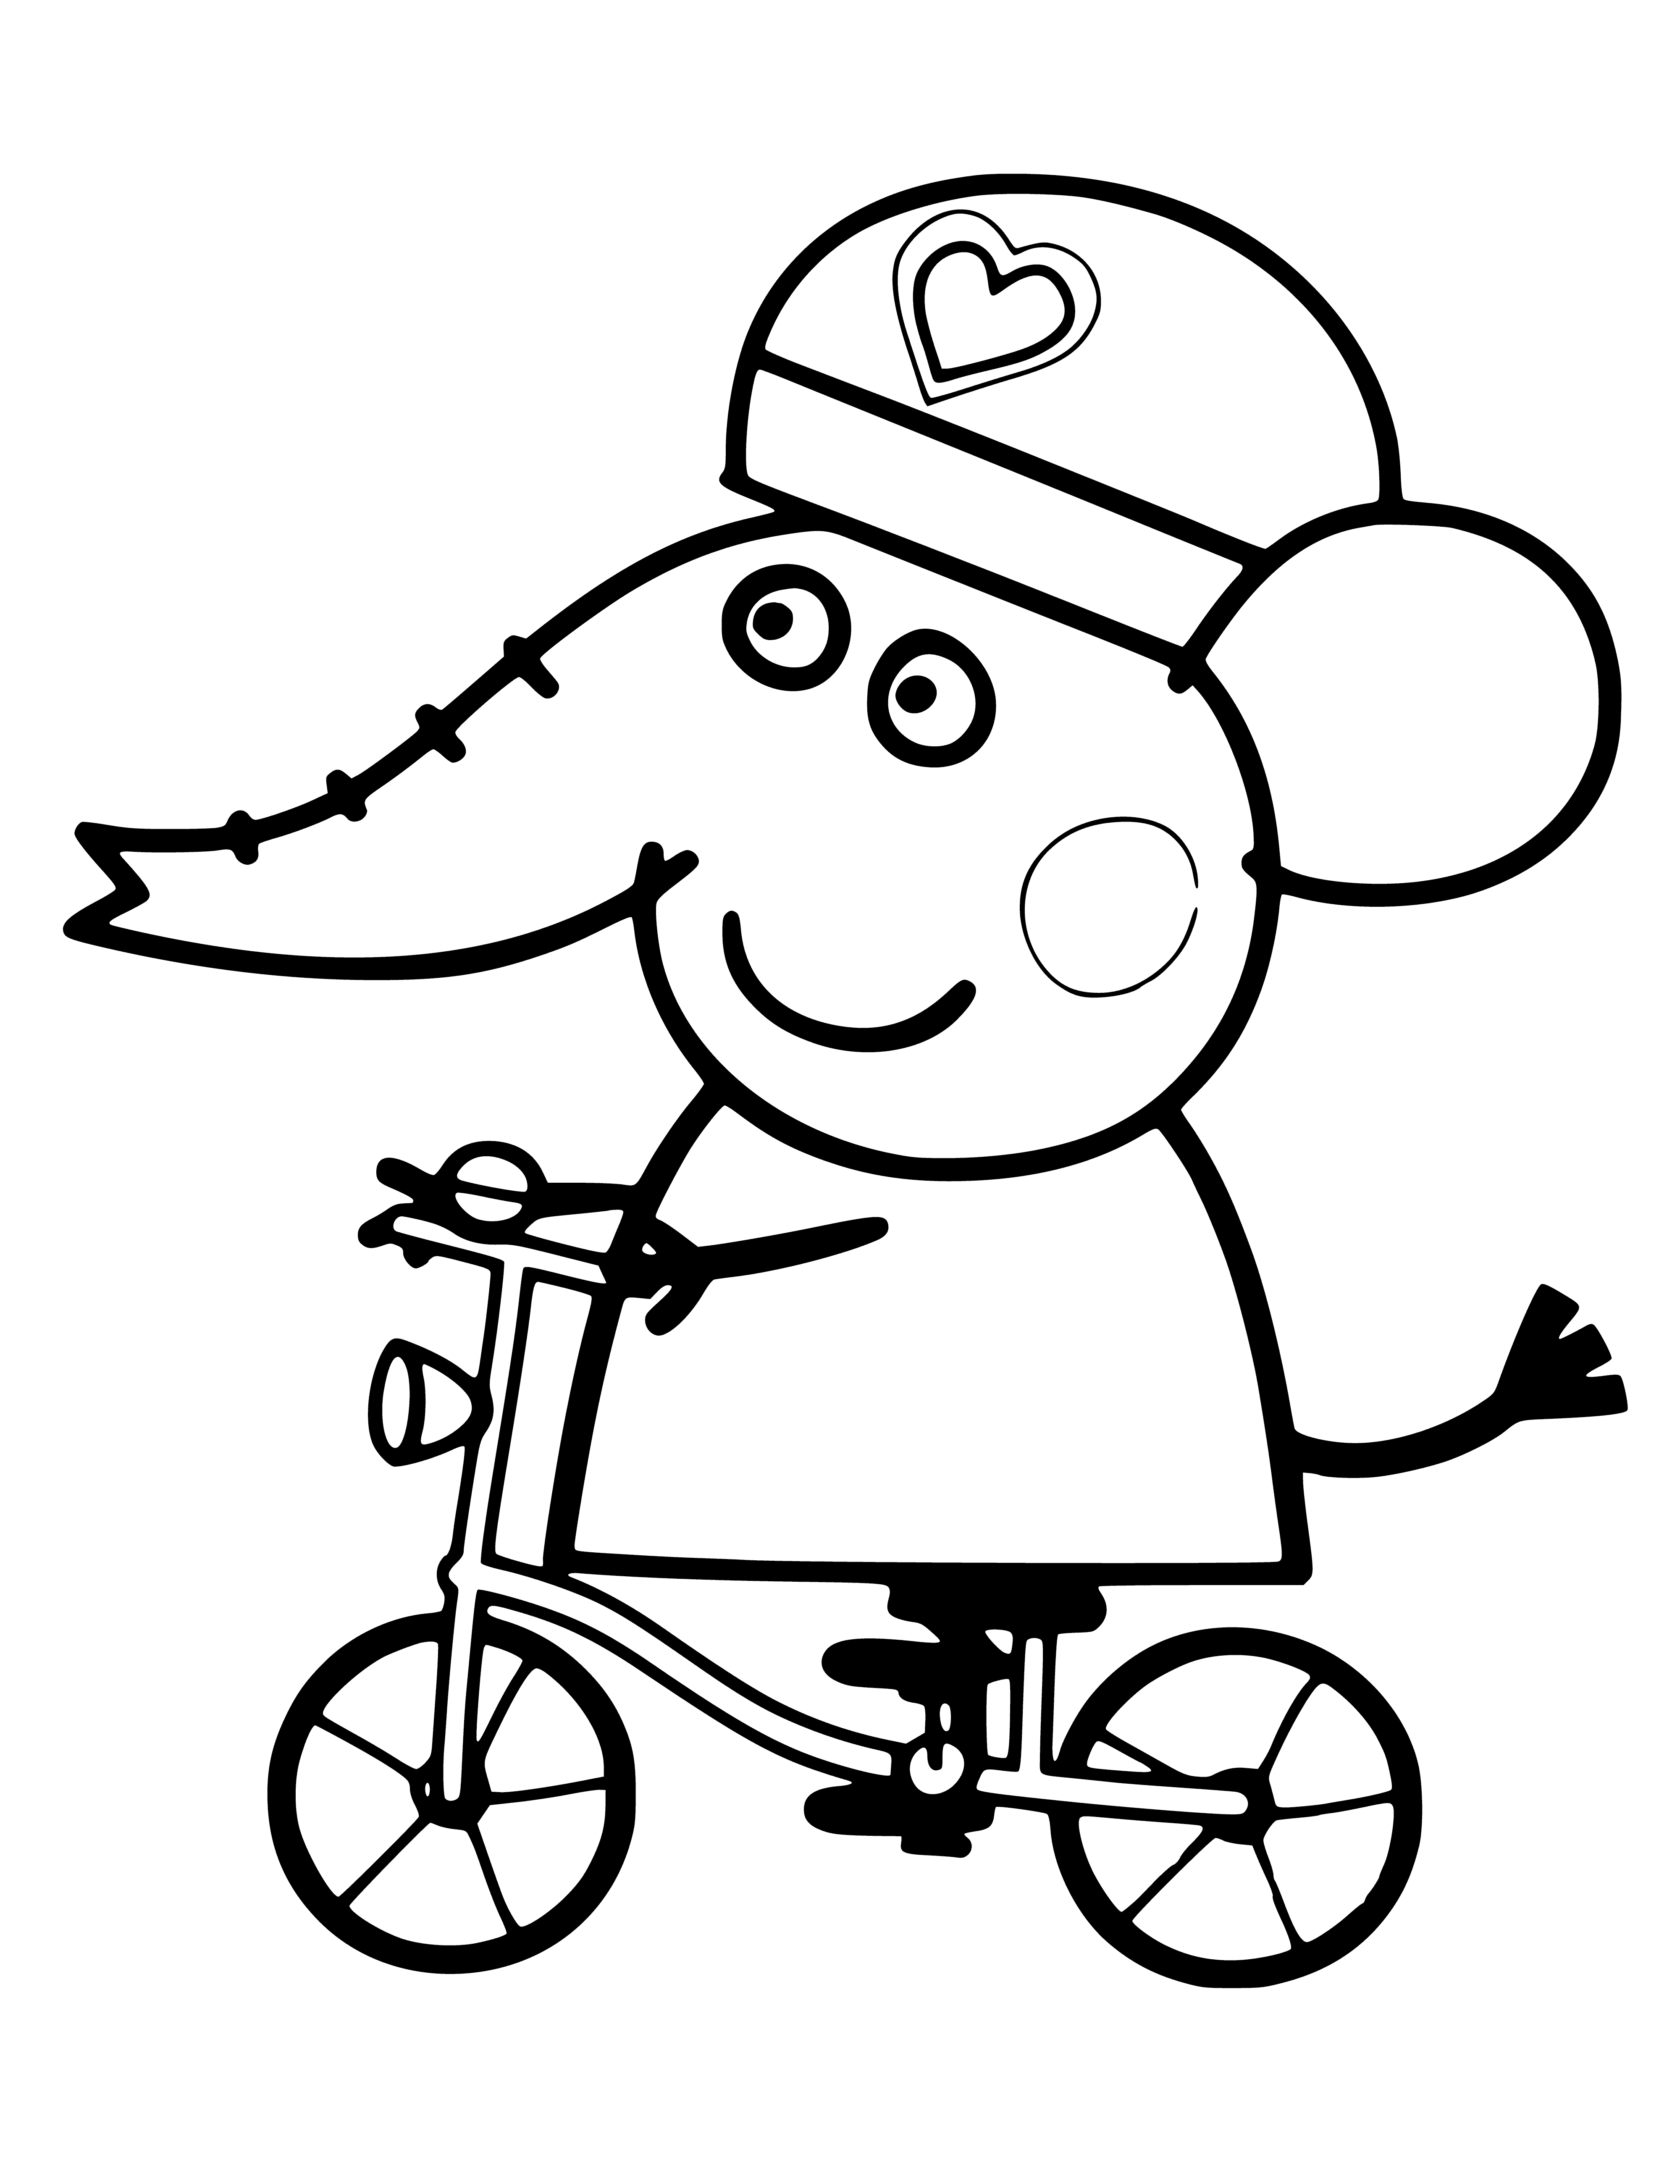 Emily on a bike coloring page